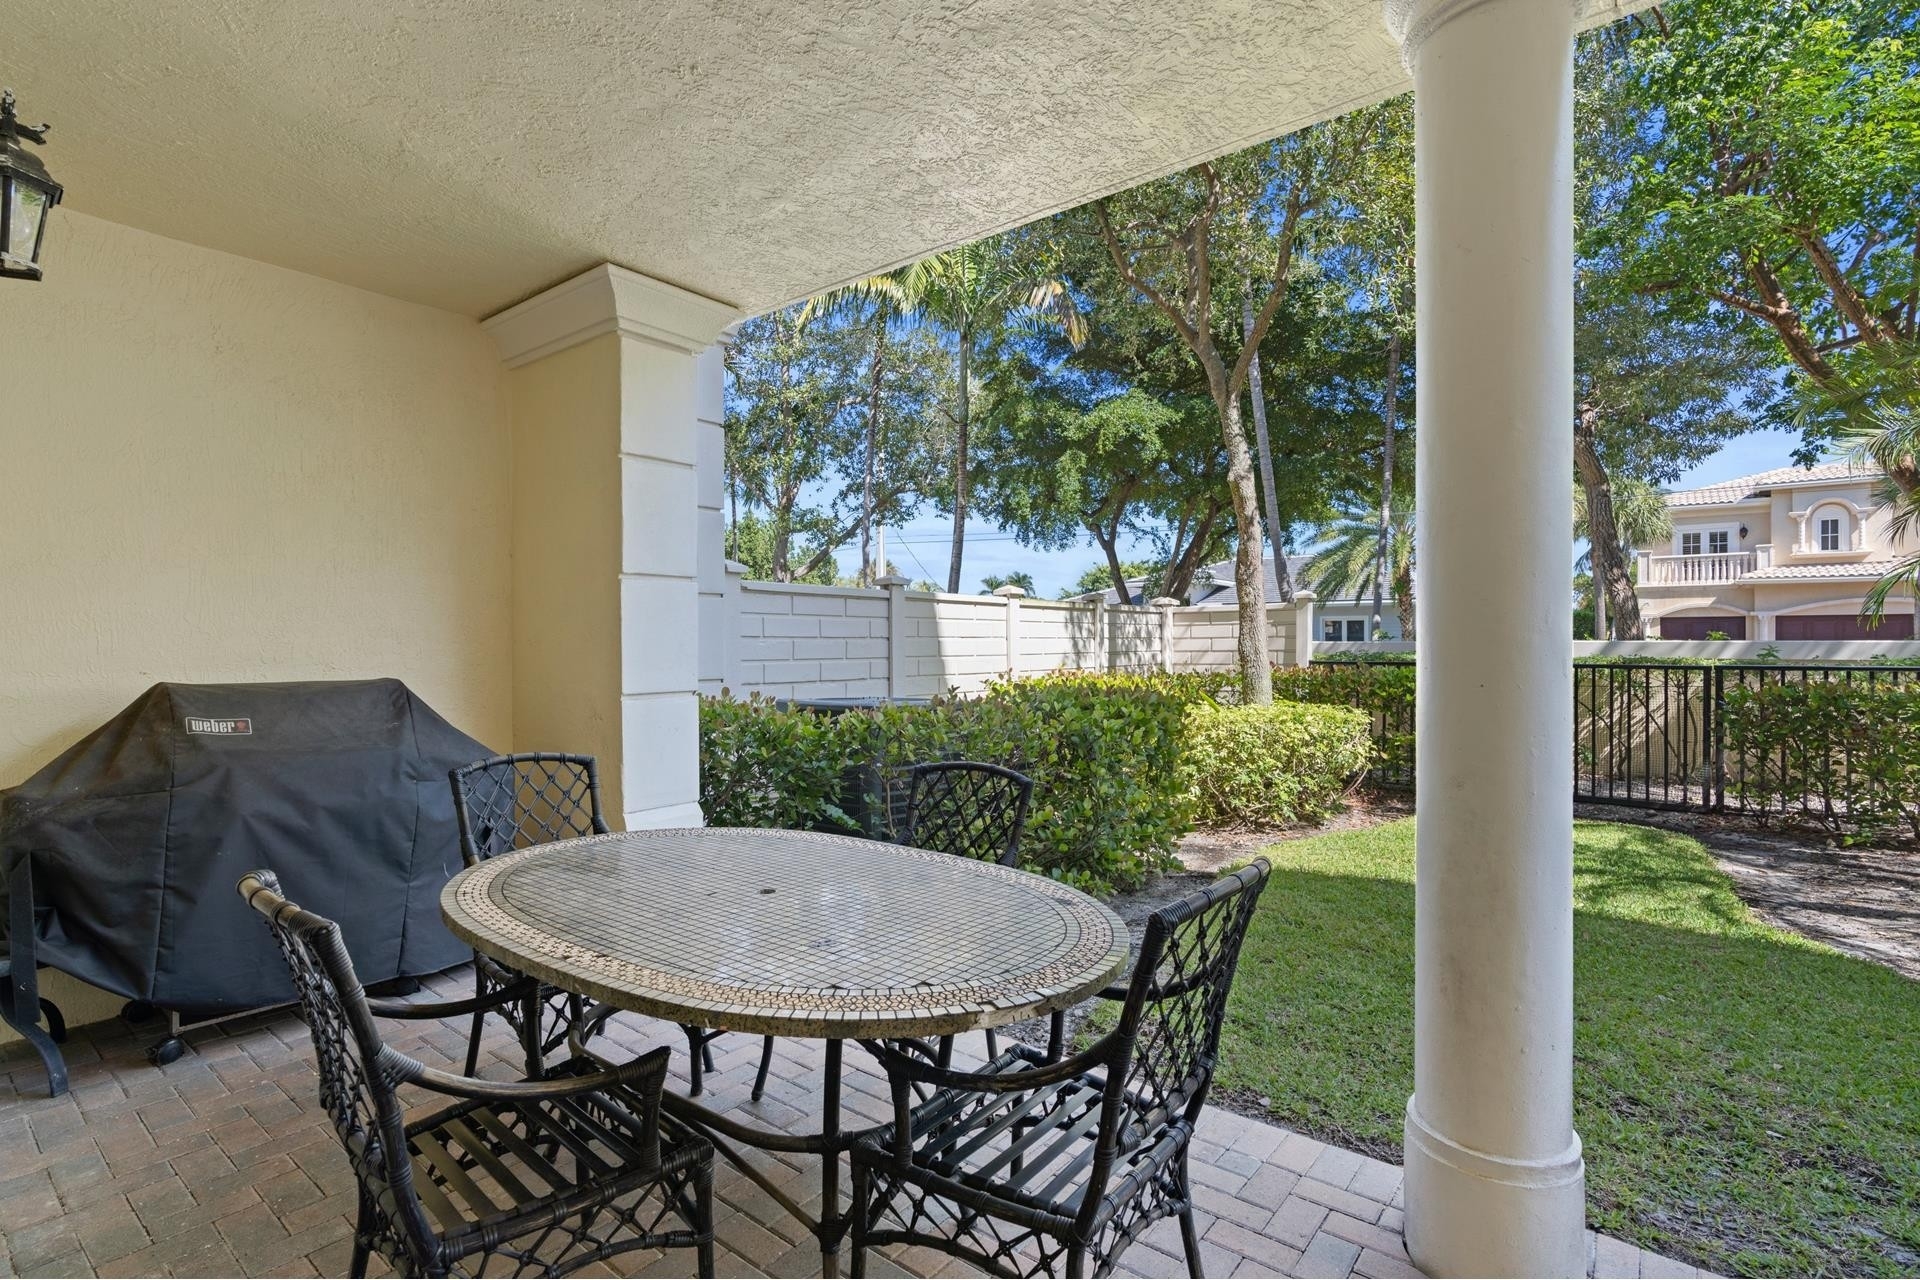 29. Single Family Townhouse for Sale at Delray Manors, Boca Raton, FL 33487